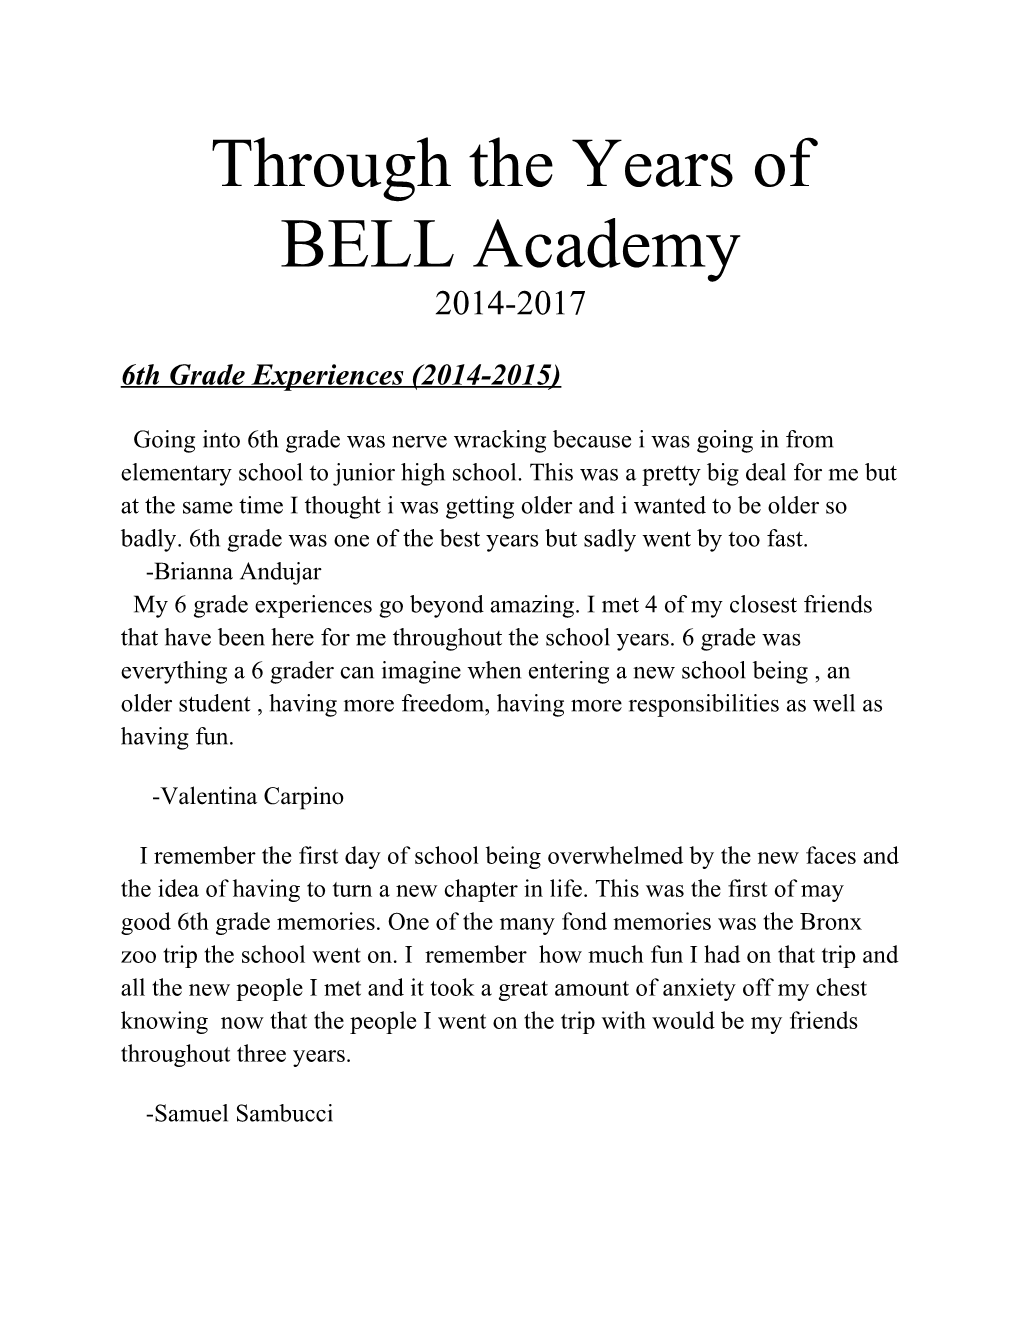 Through the Years of BELL Academy